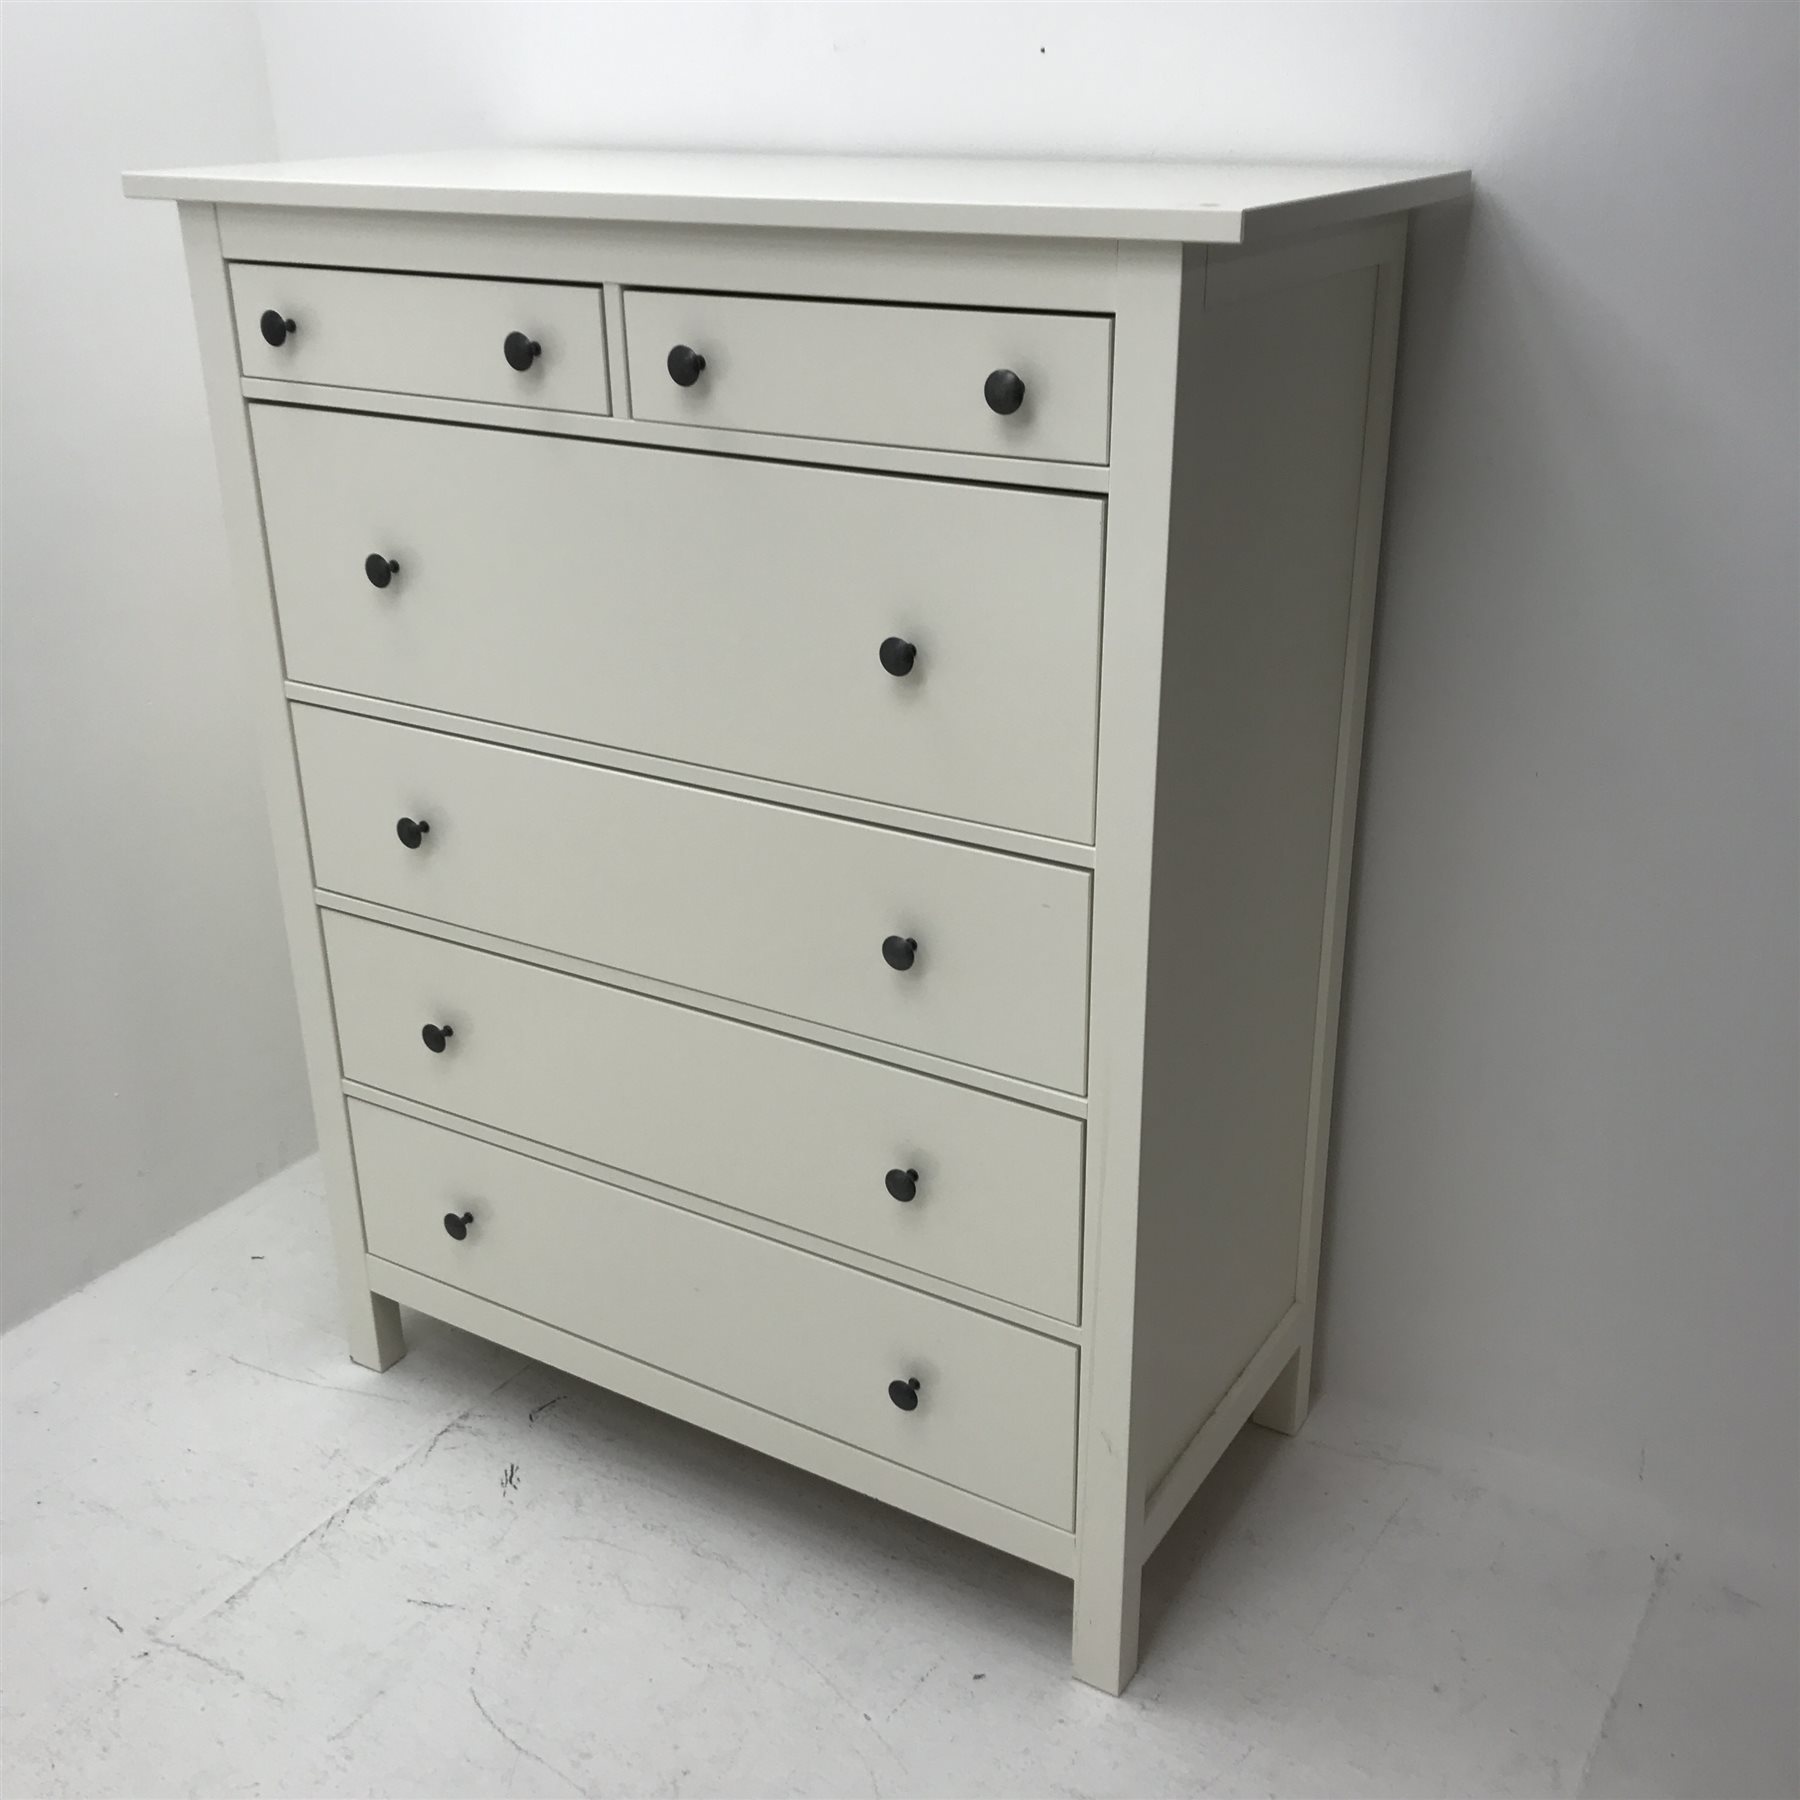 Ikea chest, two short and four graduating drawers, white painted finish, stile supports, W111cm, H13